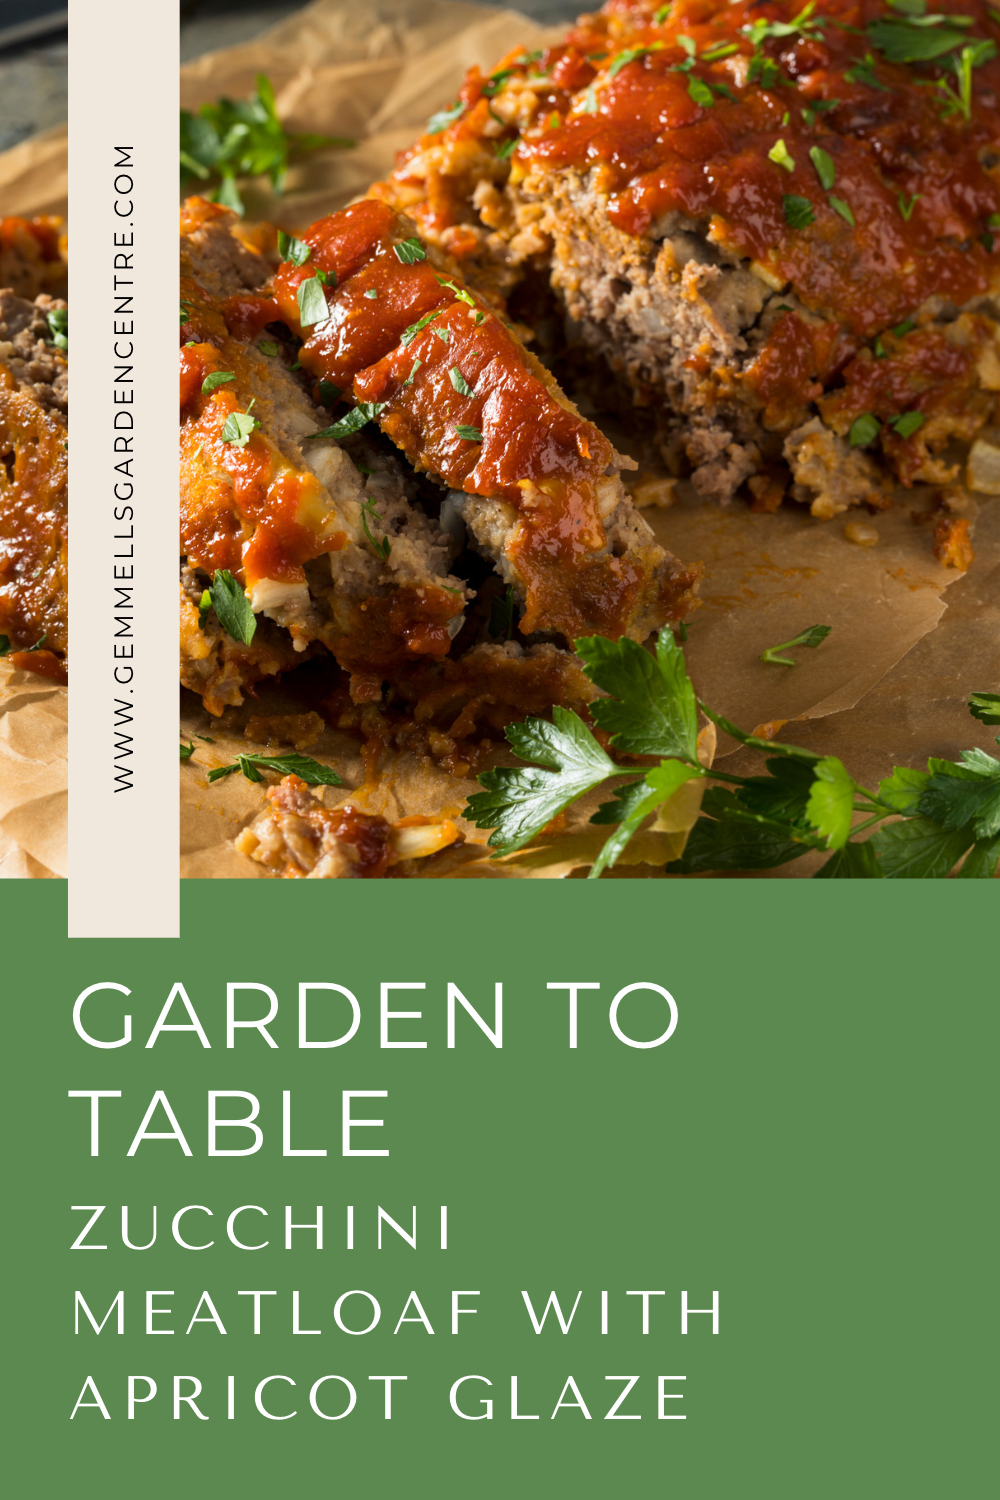 garden to table zucchini meatload with apricot glaze